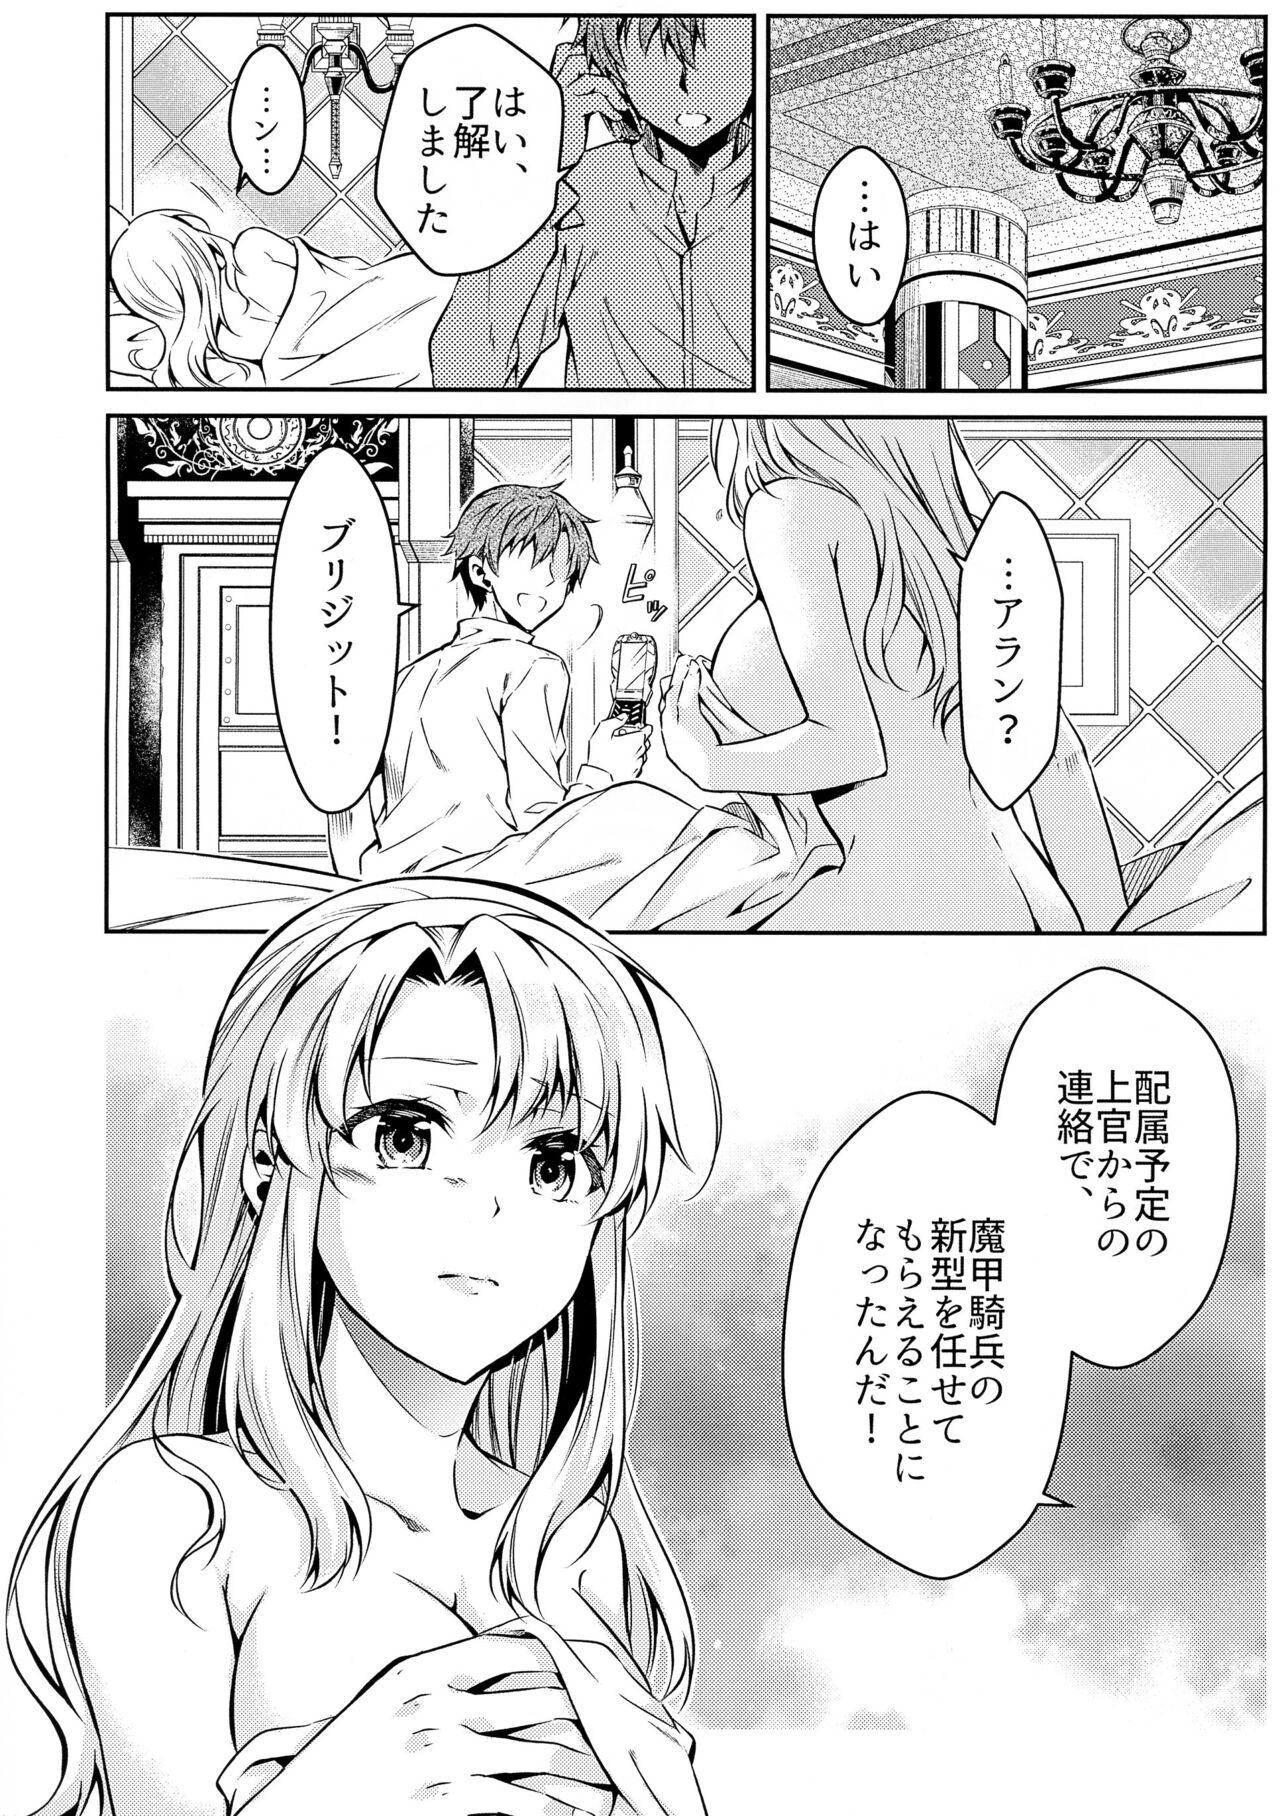 Asiansex Affection & Blessing - The legend of heroes | eiyuu densetsu Rough Porn - Page 5